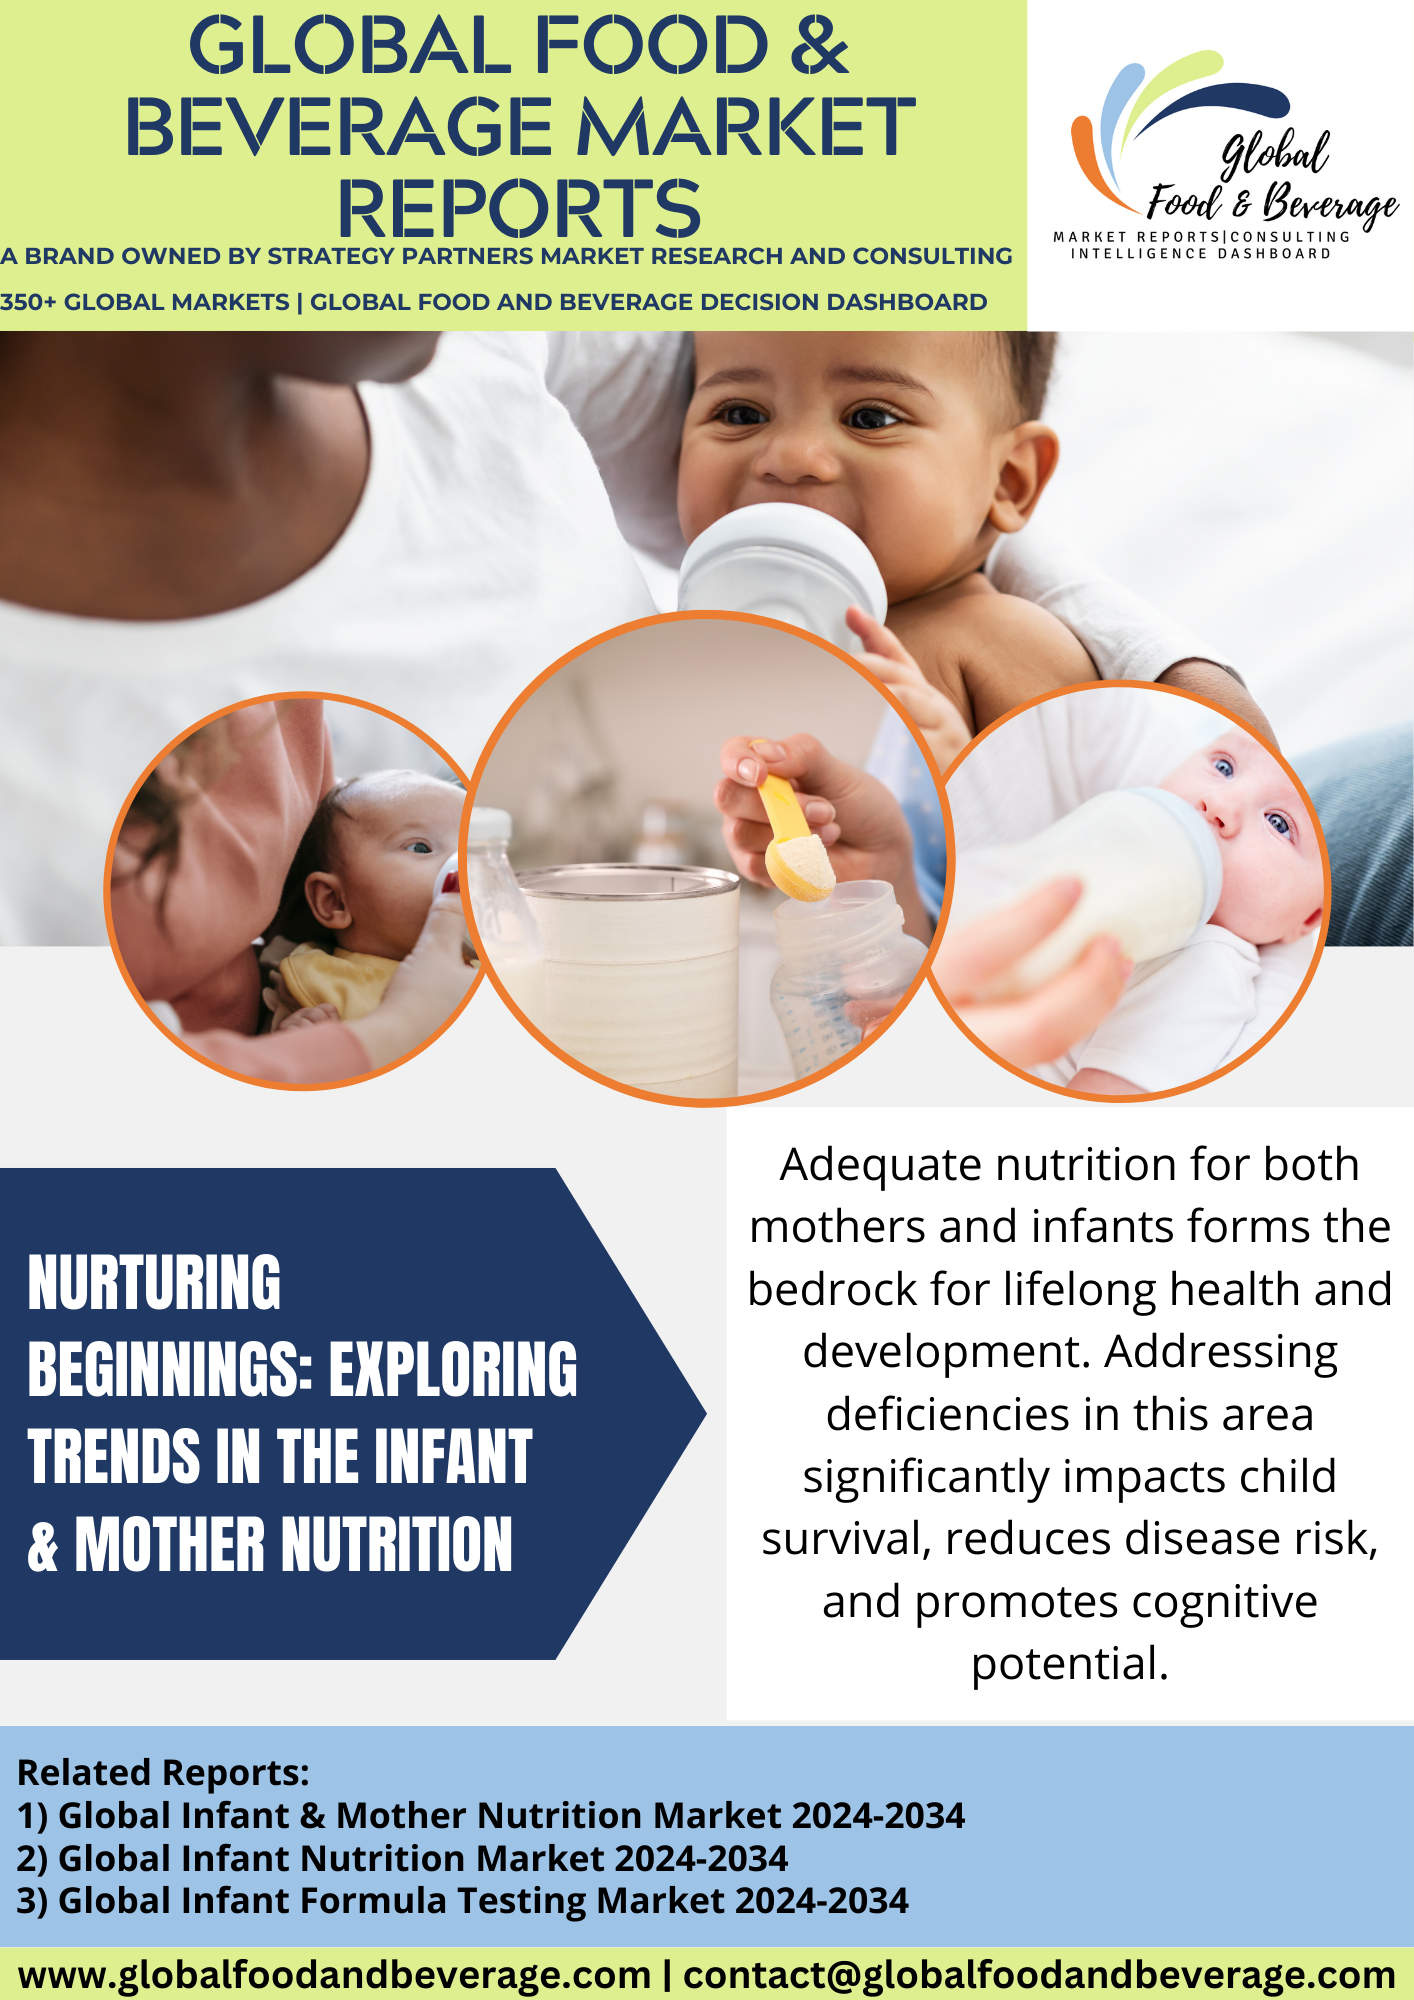 Exploring Trends in the Infant & Mother Nutrition Market